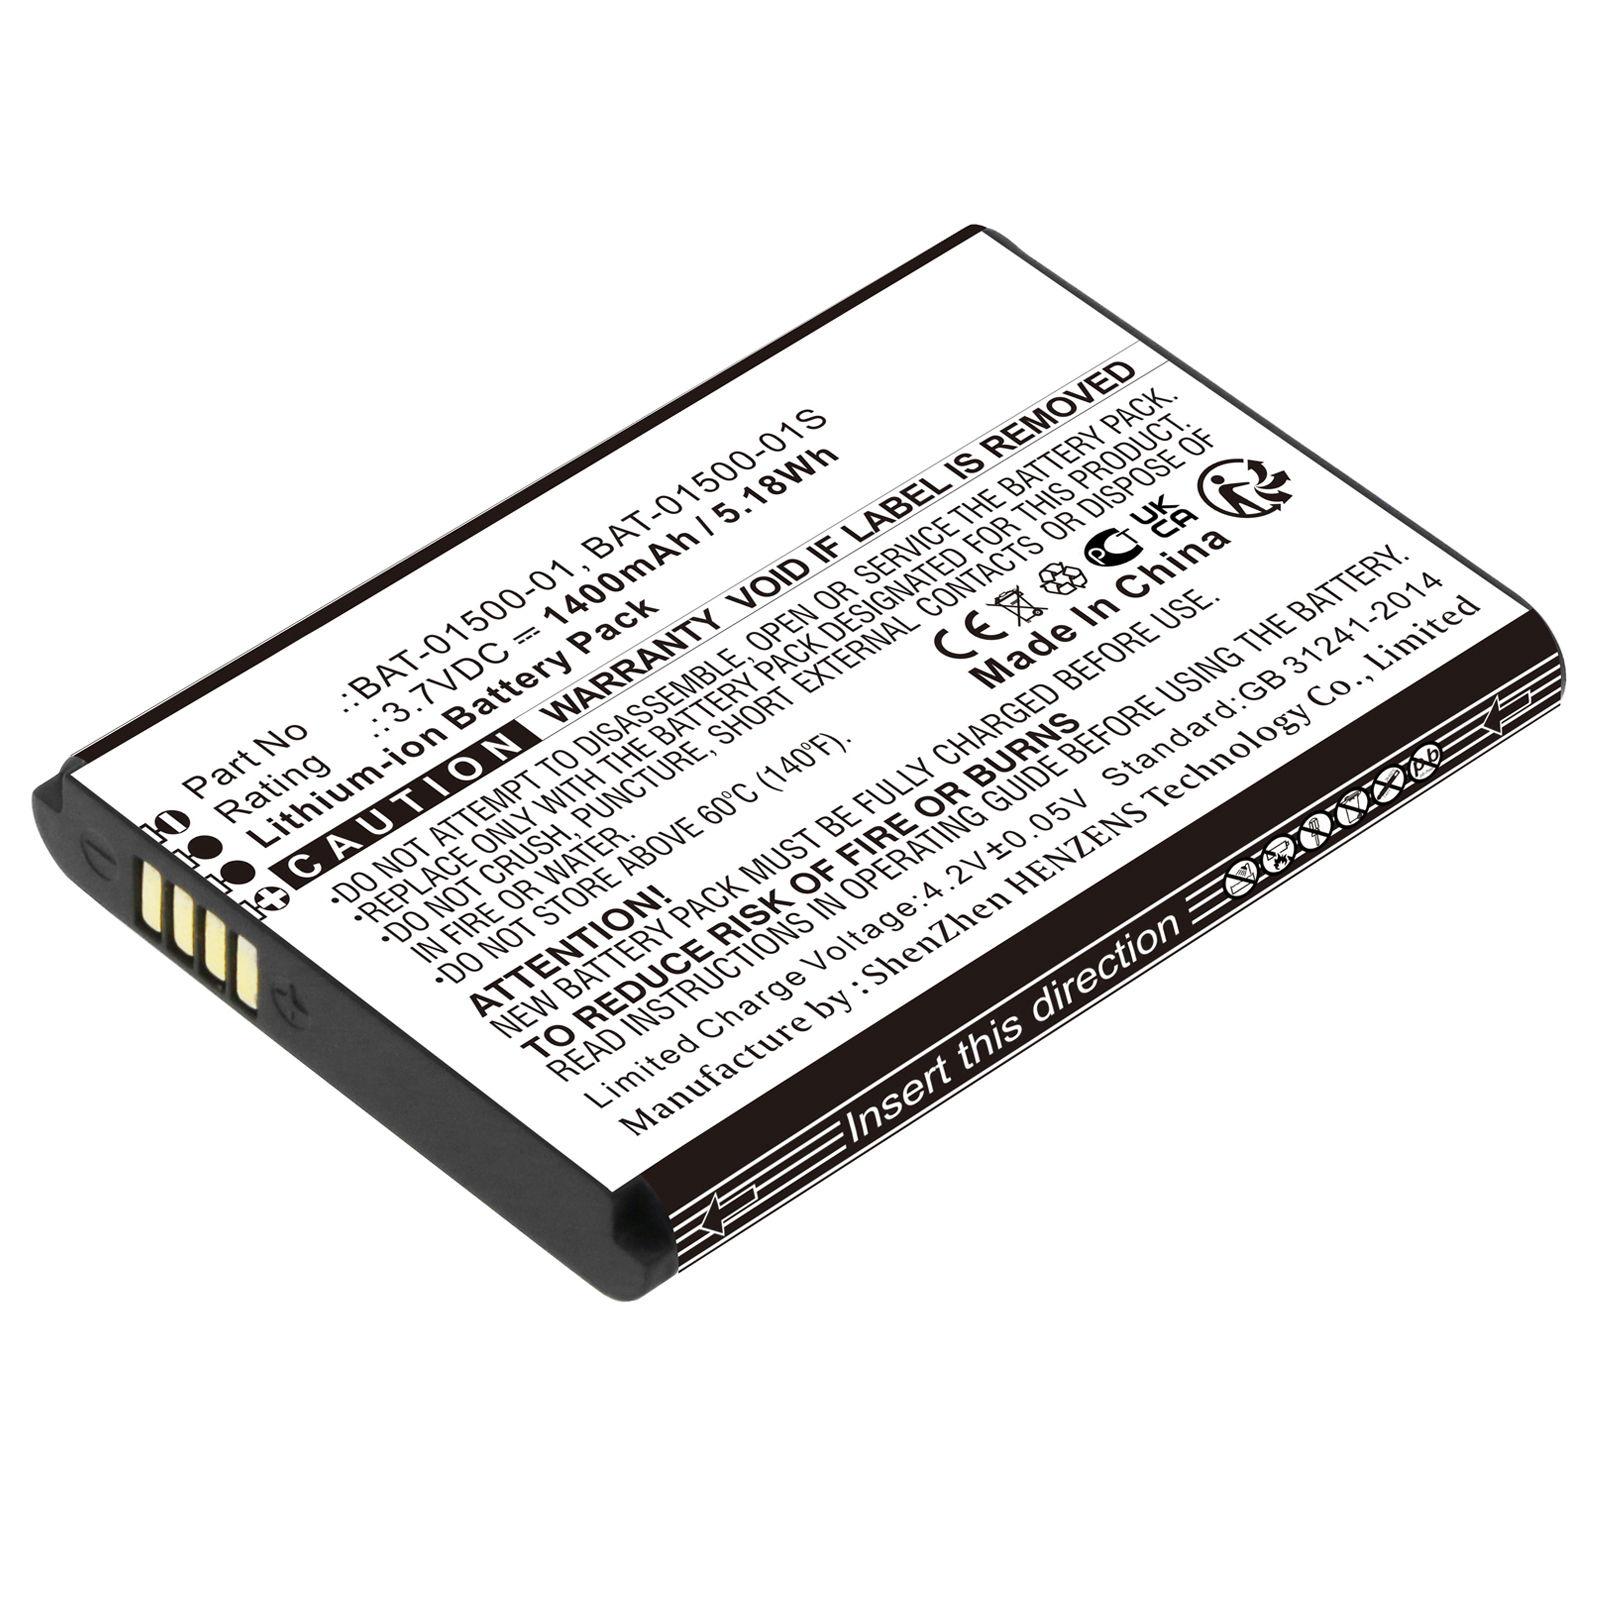 Synergy Digital Cell Phone Battery, Compatible with Sonim BAT-01500-01 Cell Phone Battery (Li-ion, 3.7V, 1400mAh)